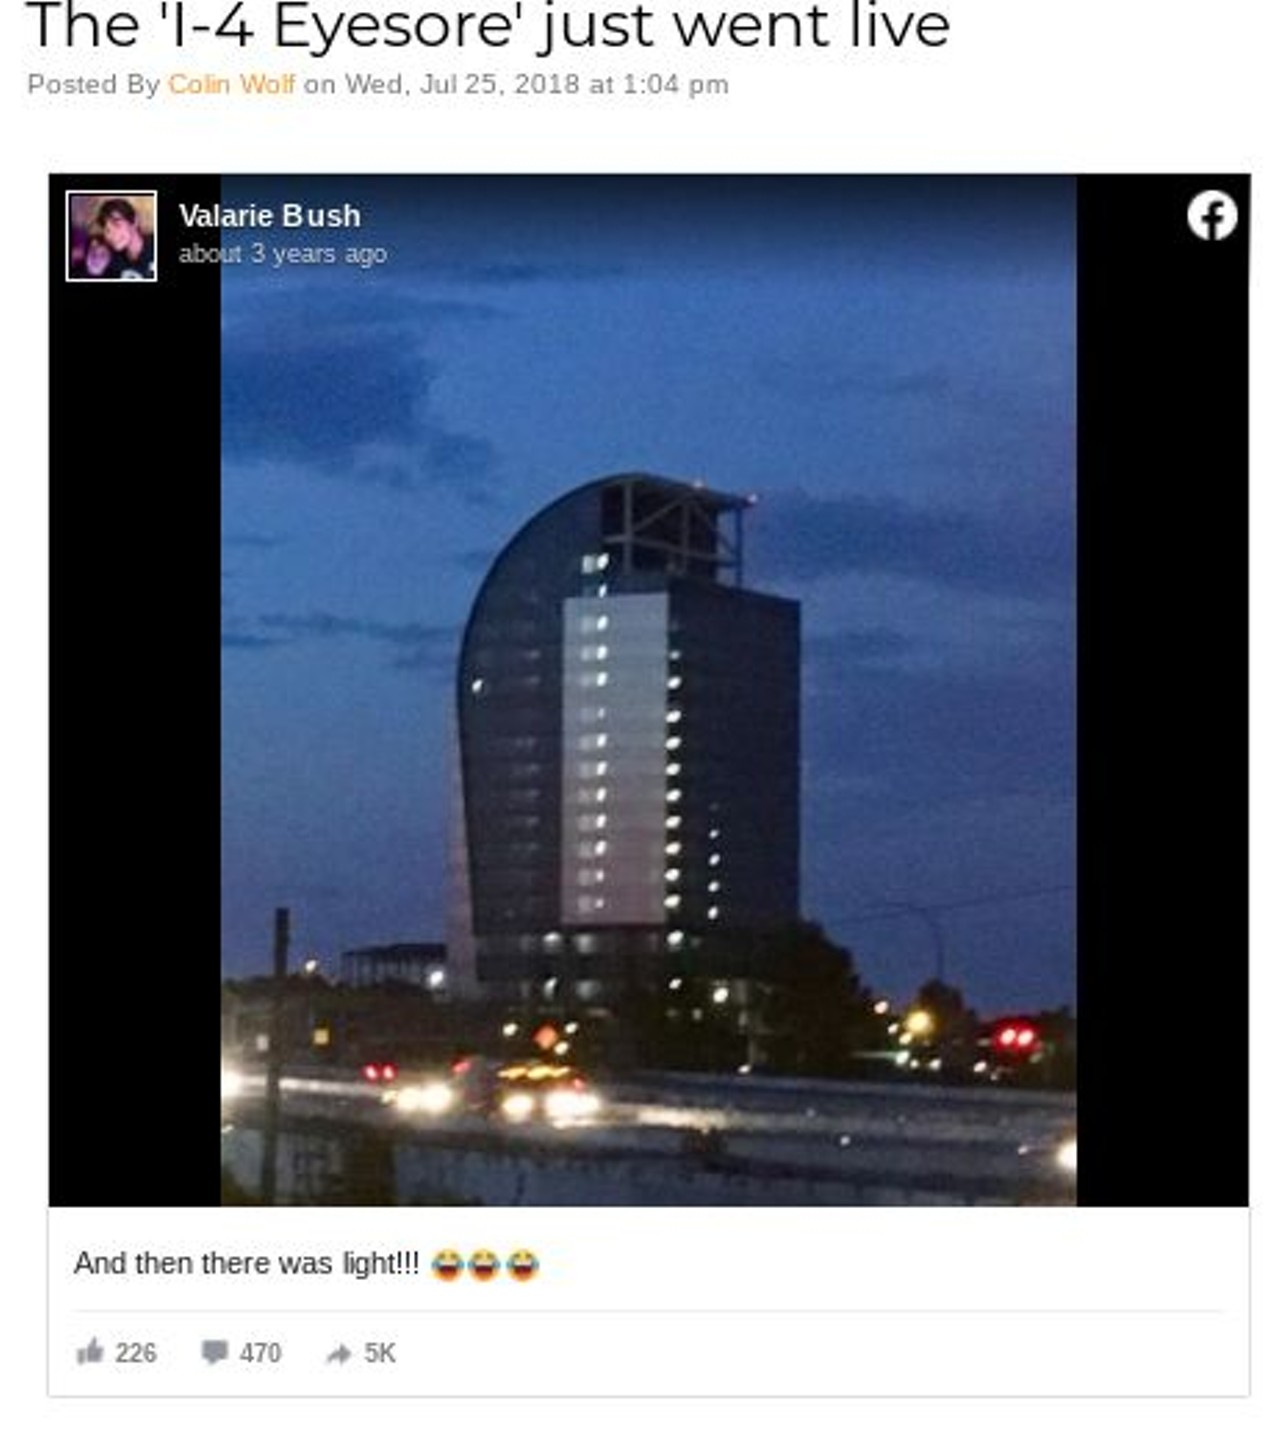 Celebrate 21 years of the 'I-4 eyesore' with some of our favorite jokes, memes